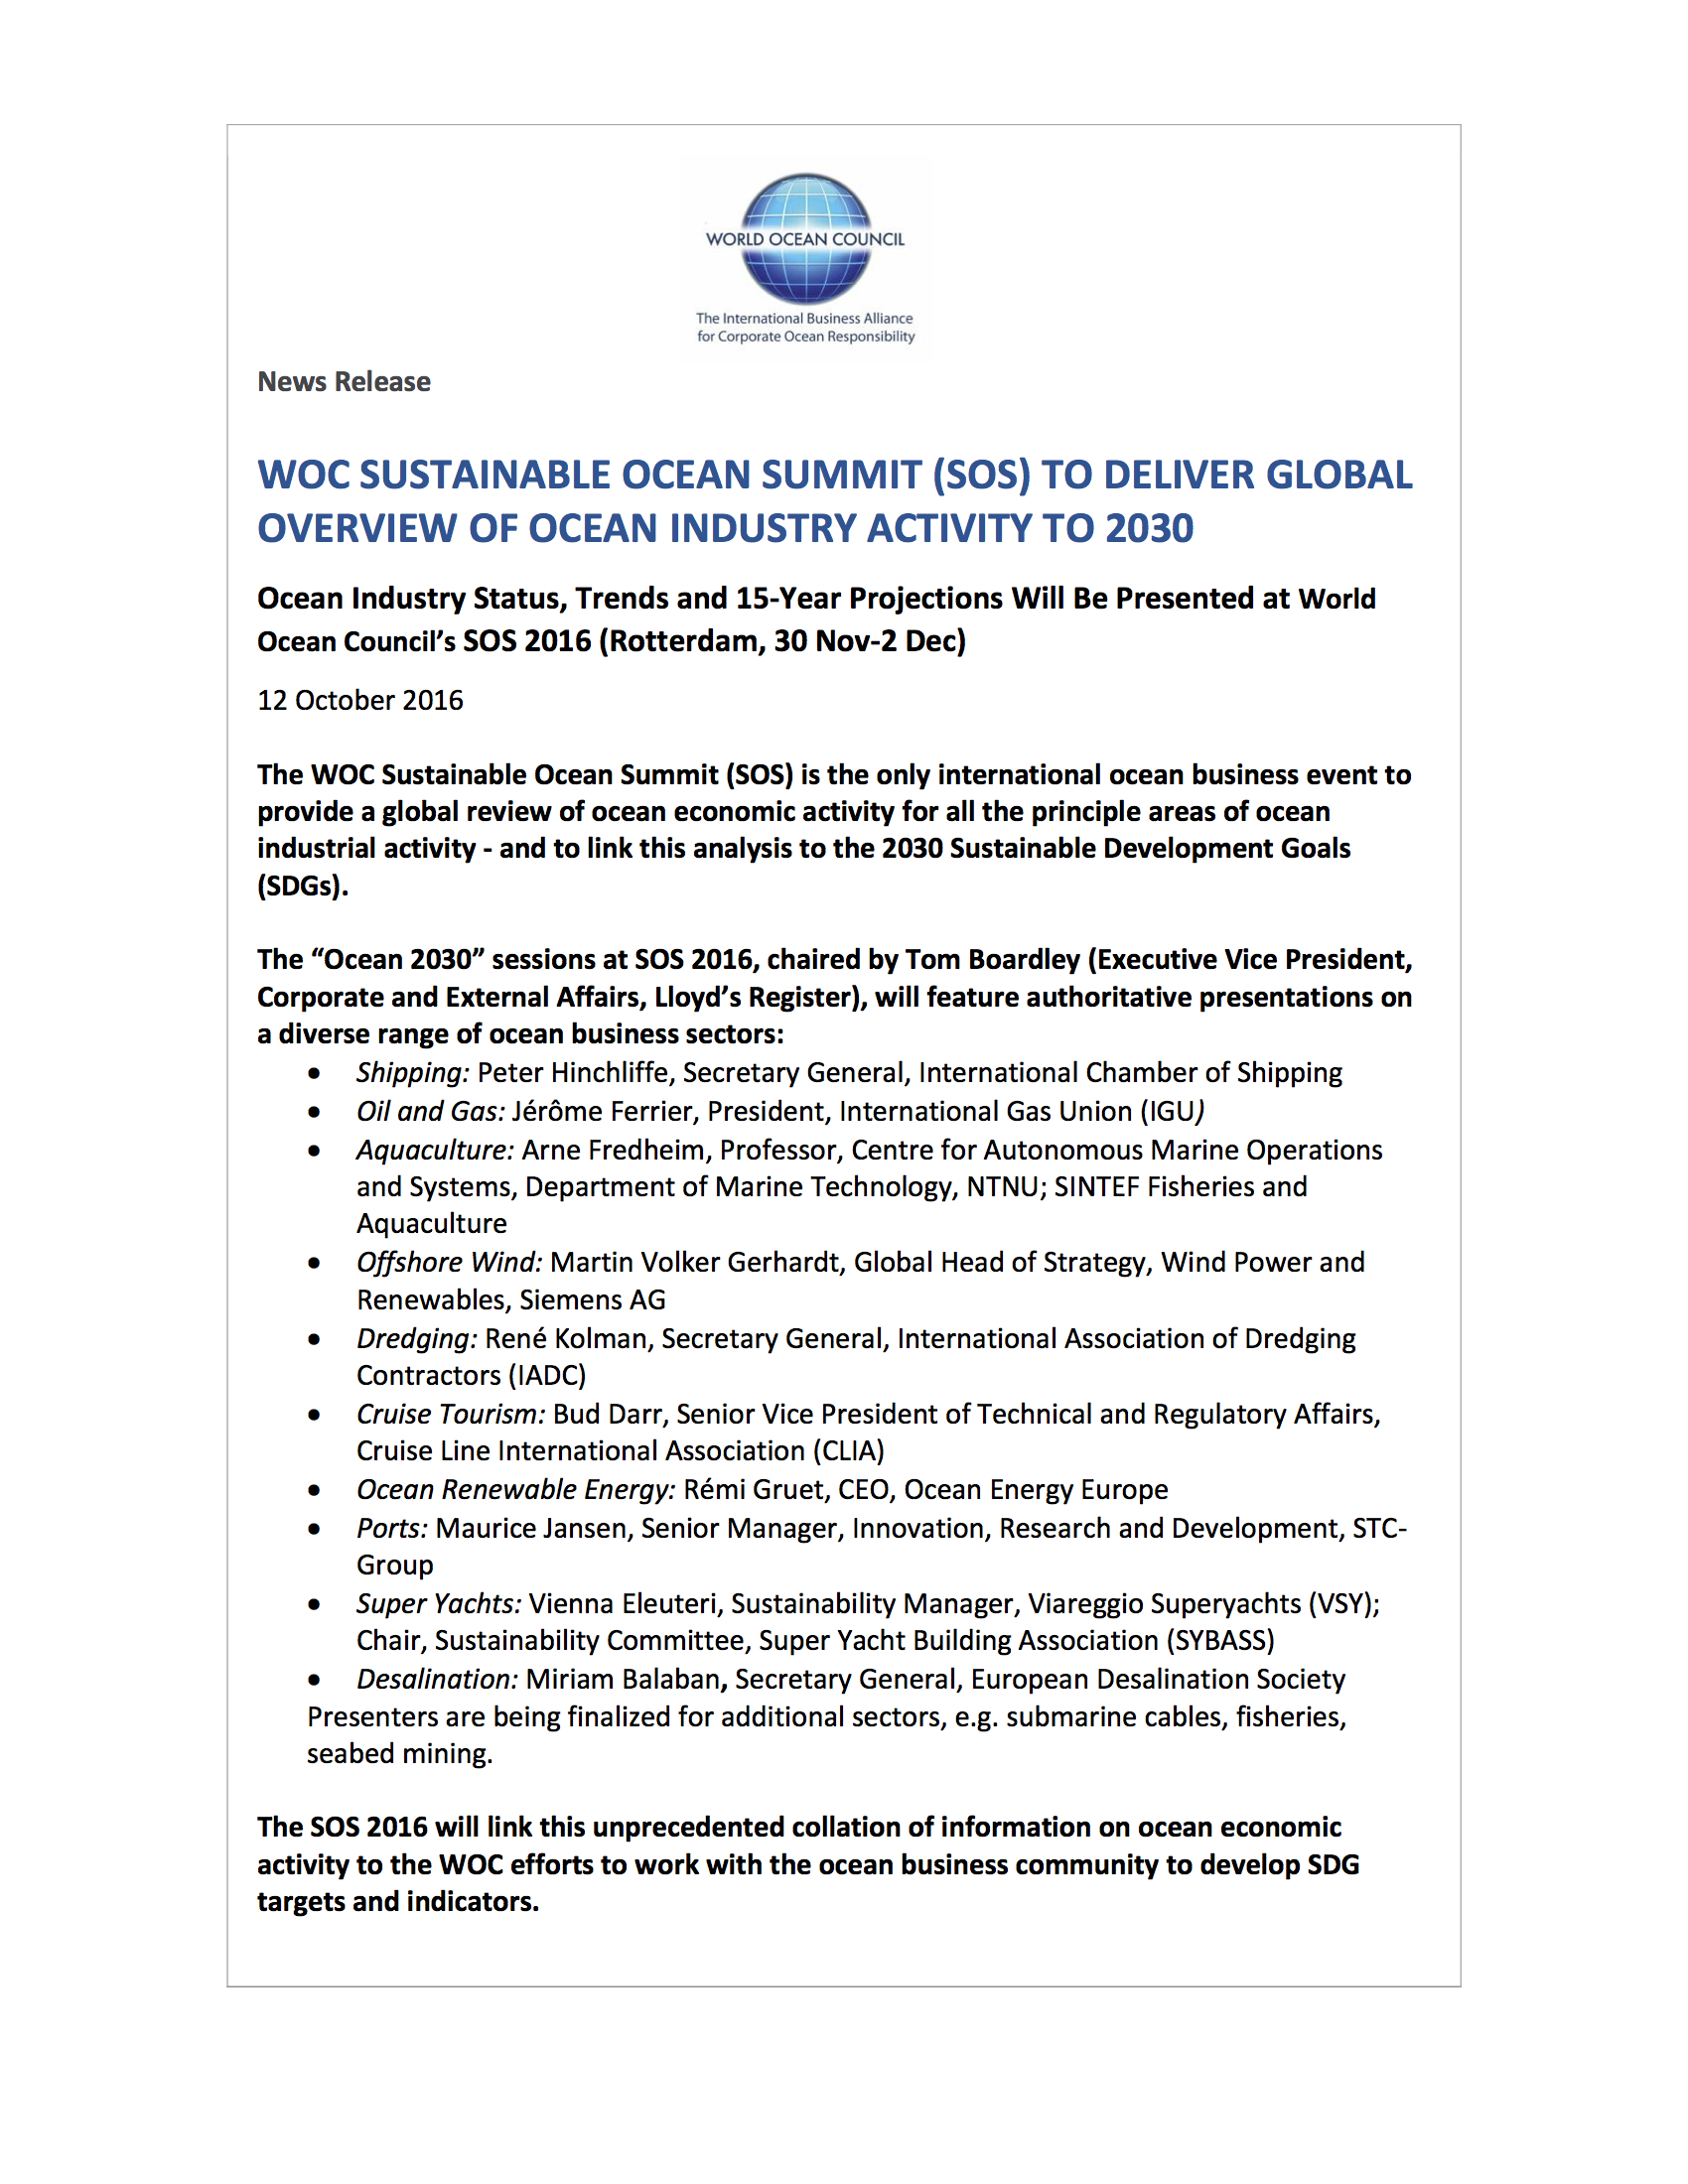 WOC News Release: 2016 10 12. WOC-SOS-To-Deliver-Global-Ocean-Industry-Status-and-Forecast